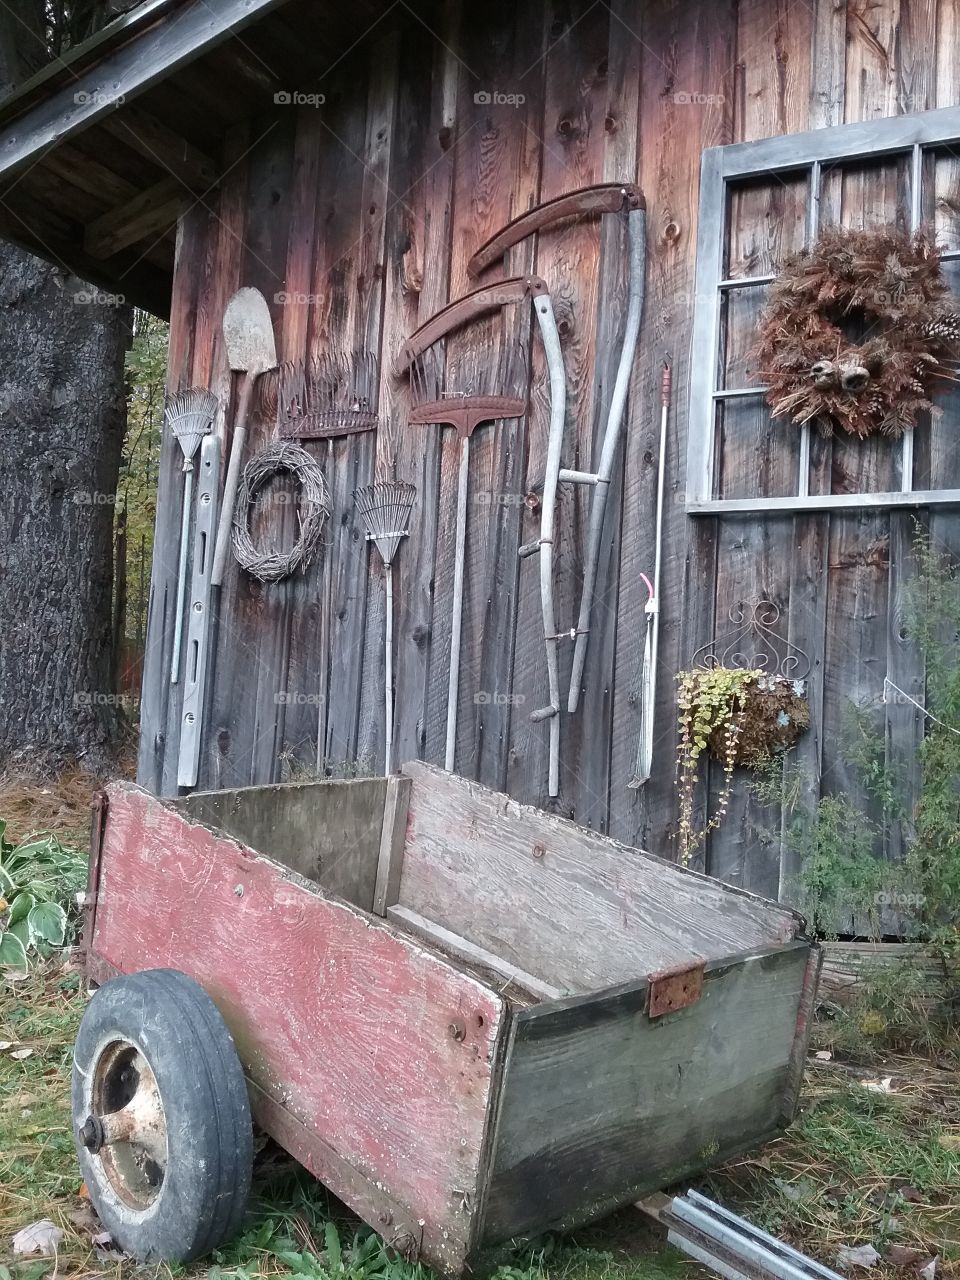 The shed in Autumn